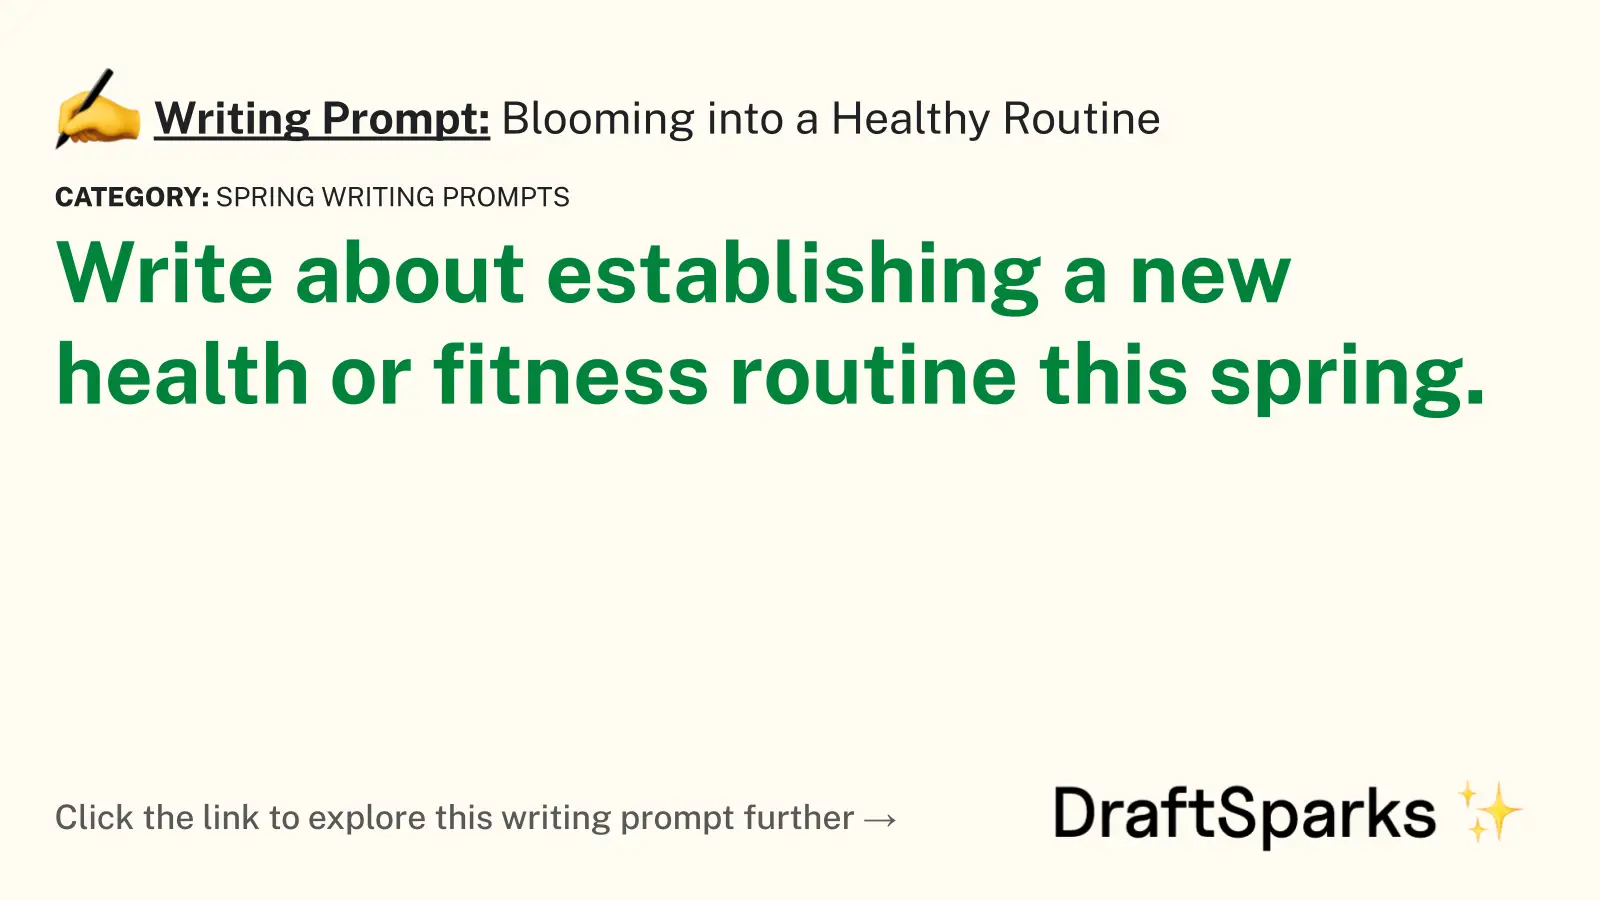 Blooming into a Healthy Routine